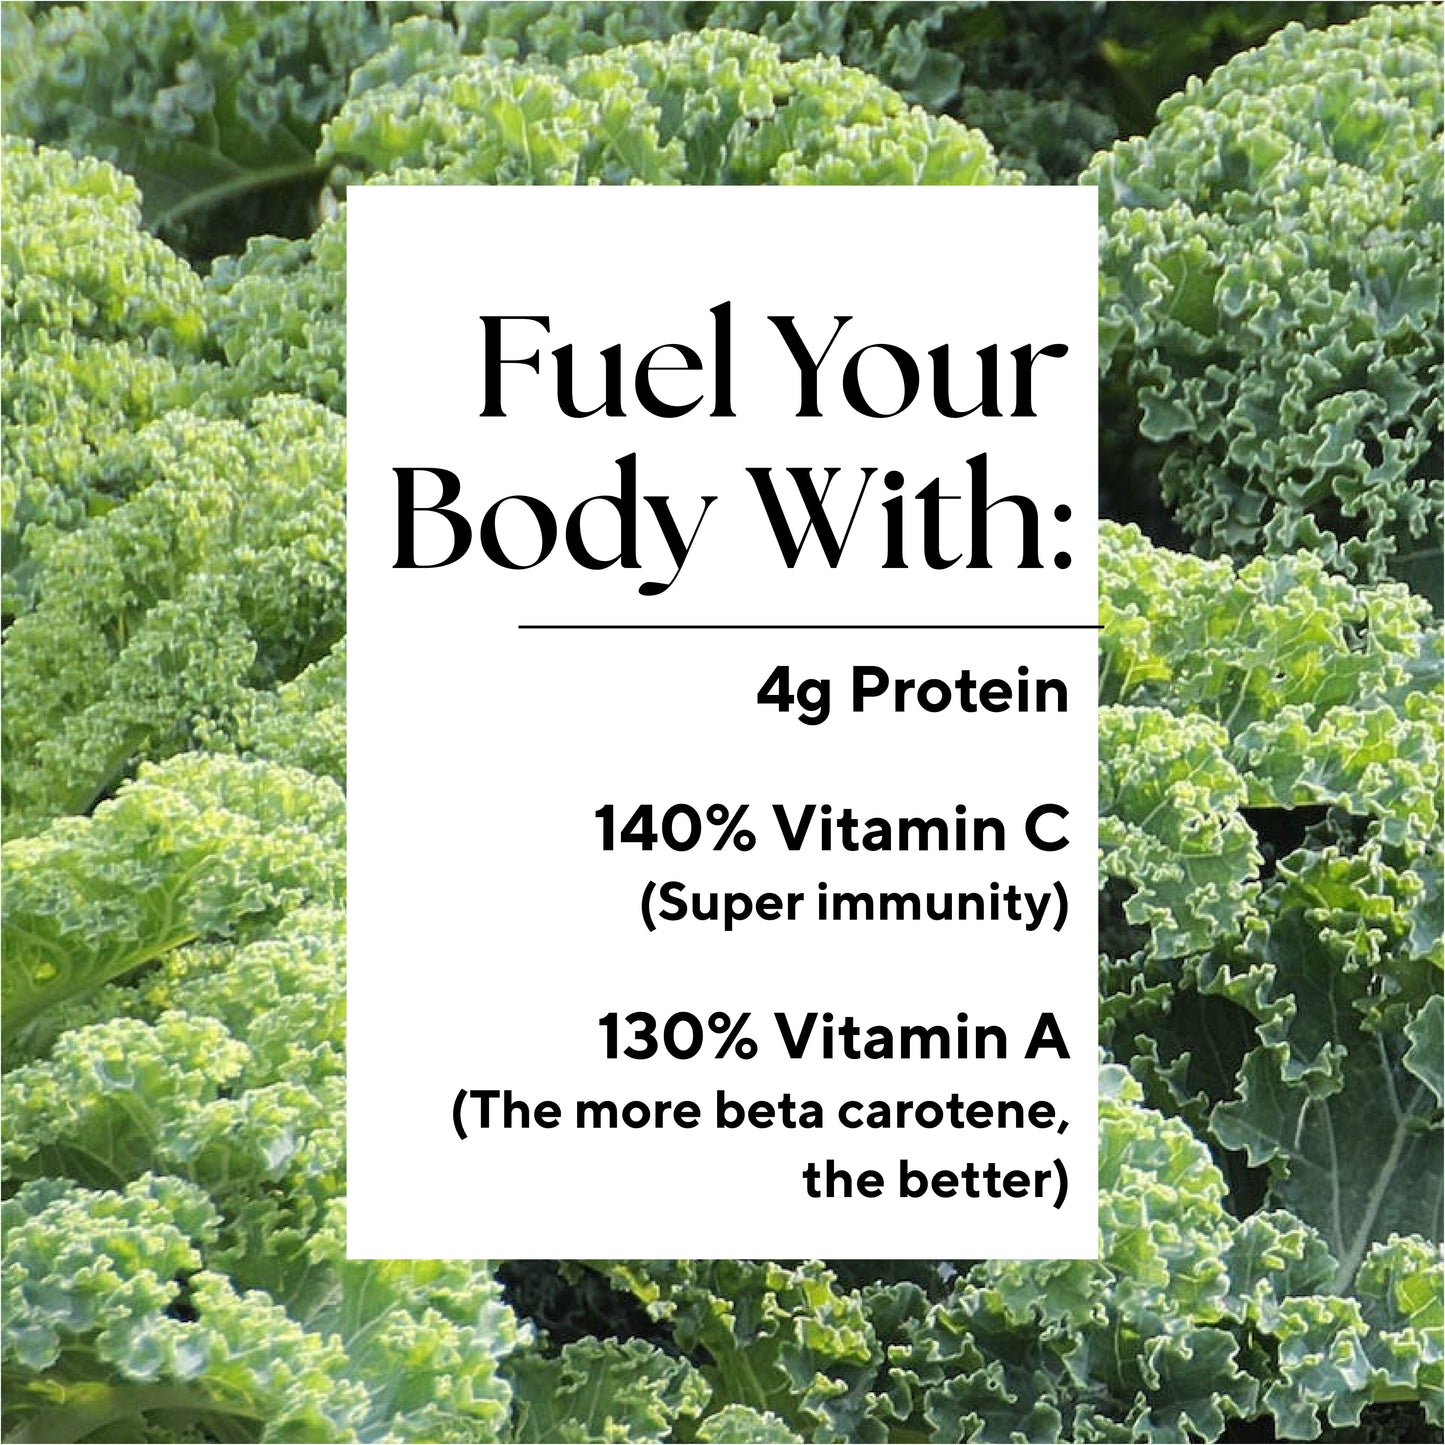 Infographic with: 4g protein, 140% Vitamin C, 130% Vitamin A the more beta caraotene, the better